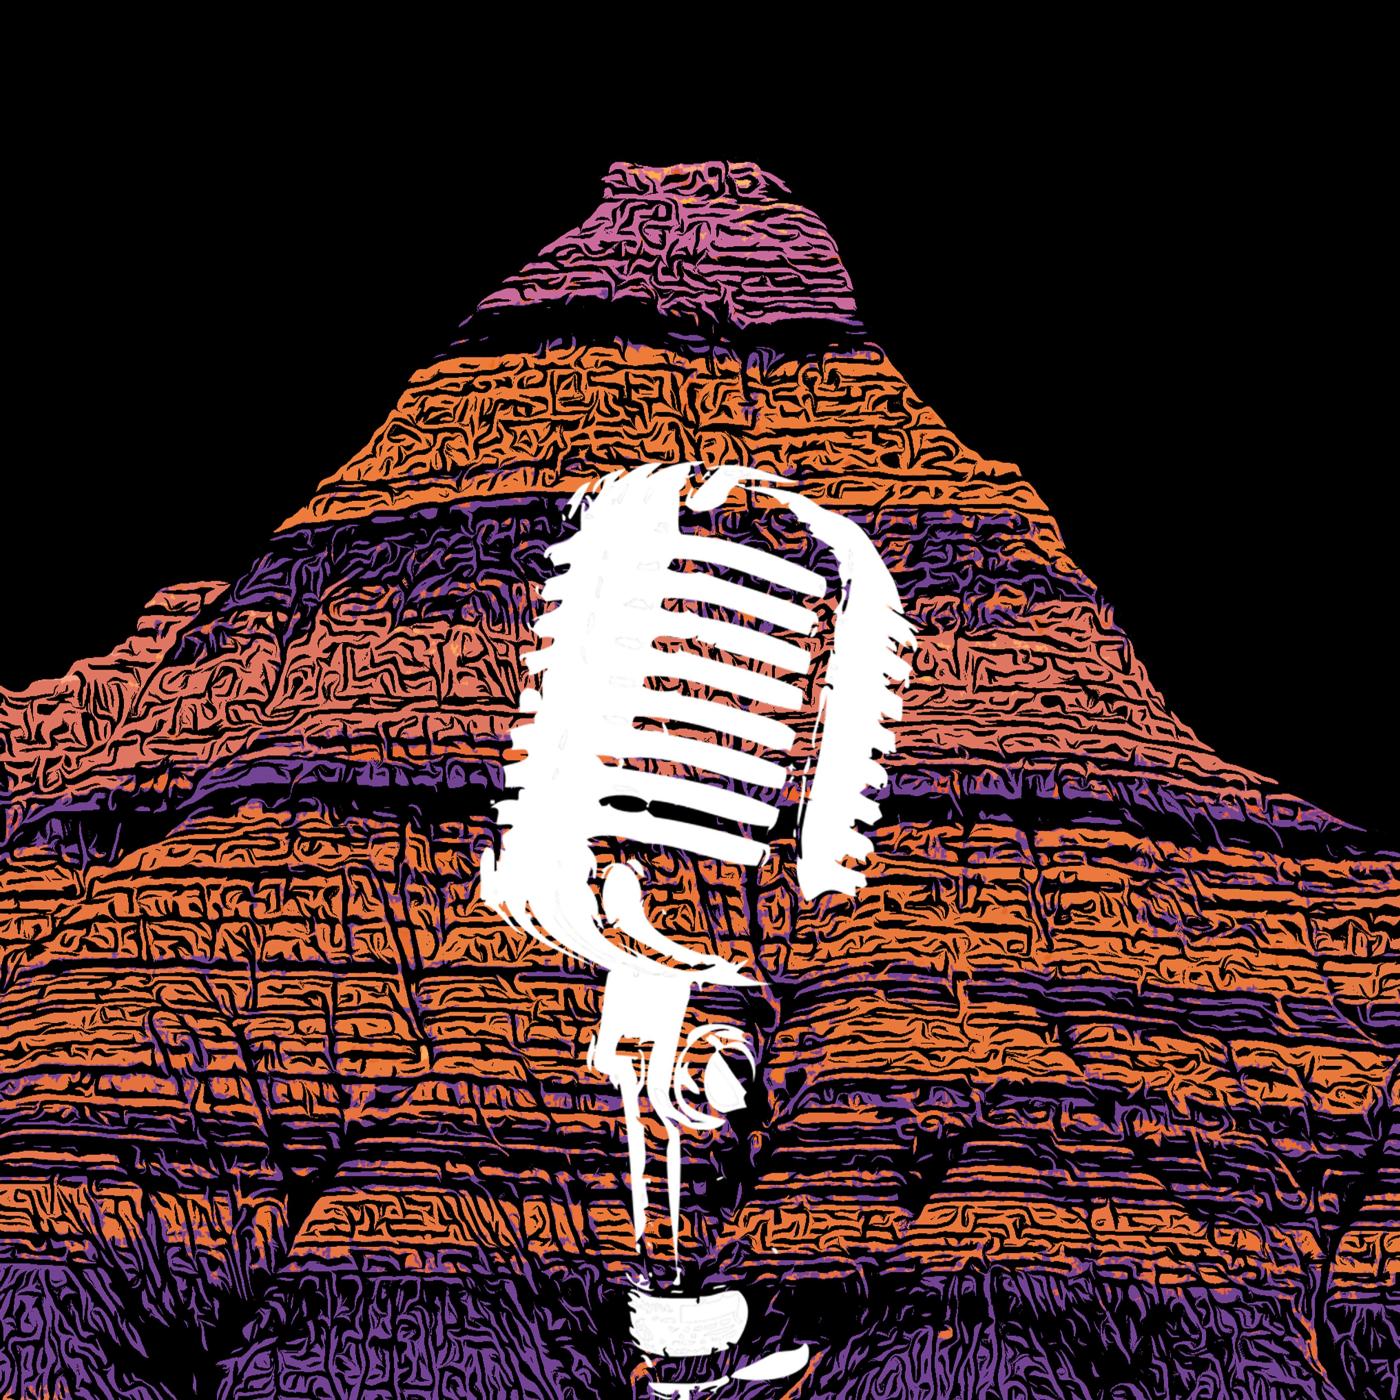 Stylized multicolor Badlands formation with a superimposed image of a white microphone.